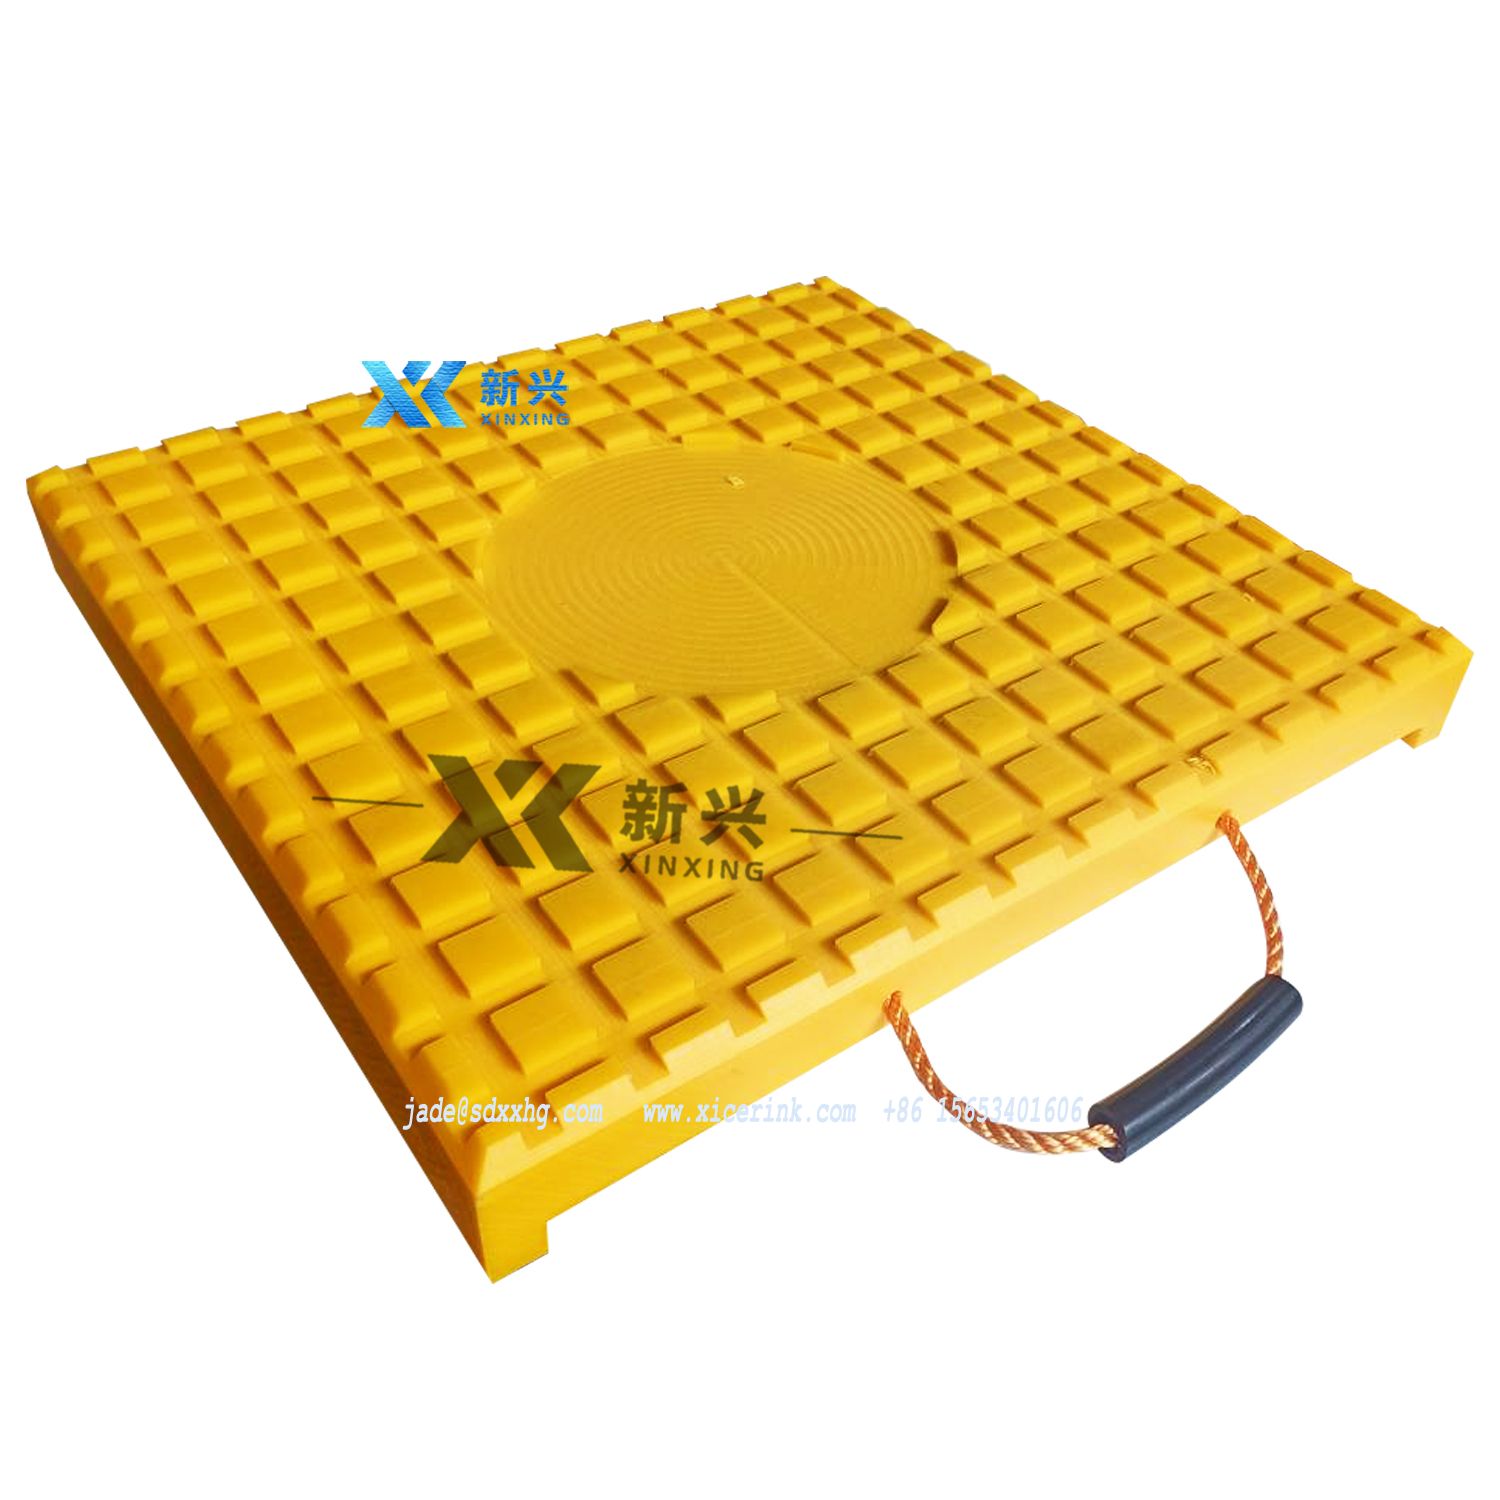 Portable outrigger pad Uhmwpe outrigger pad